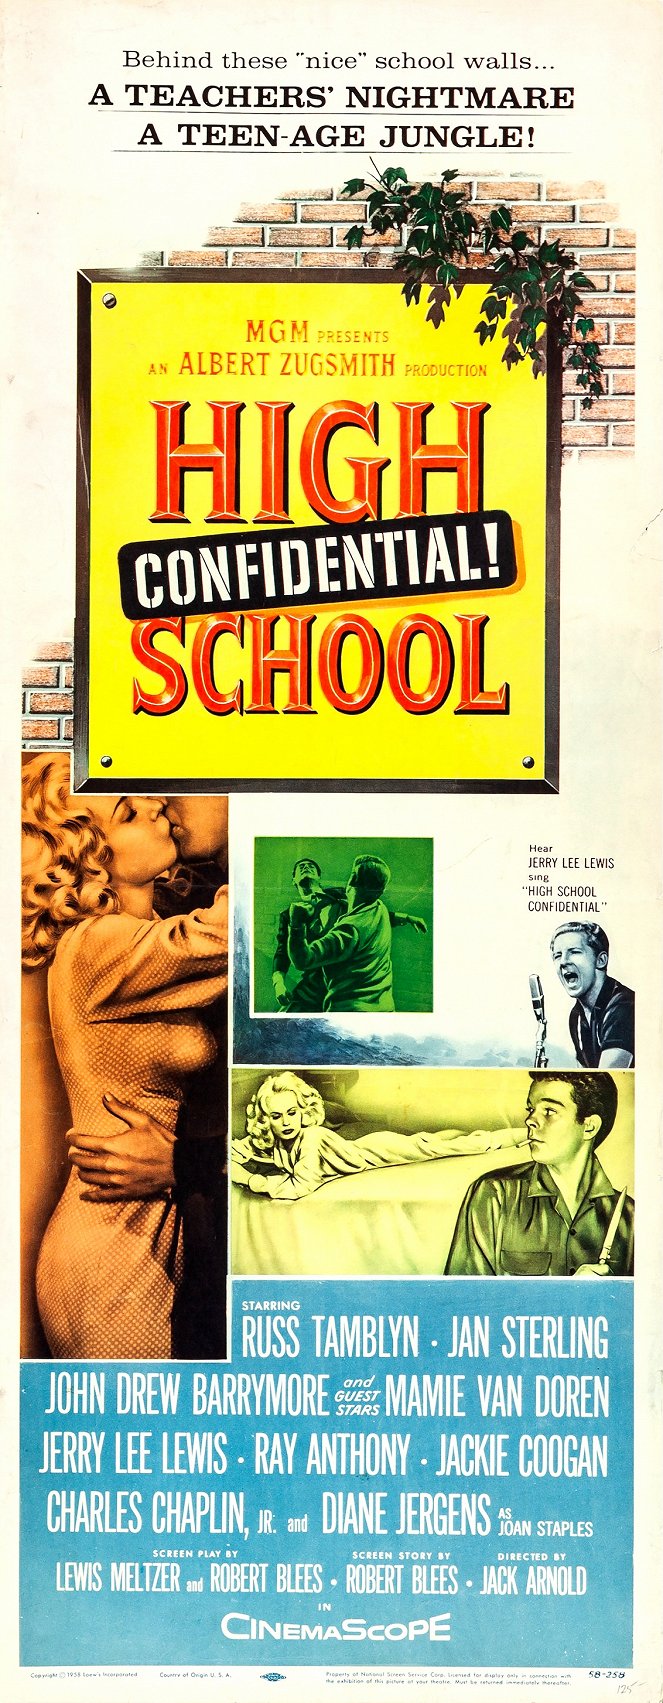 High School Confidential! - Posters